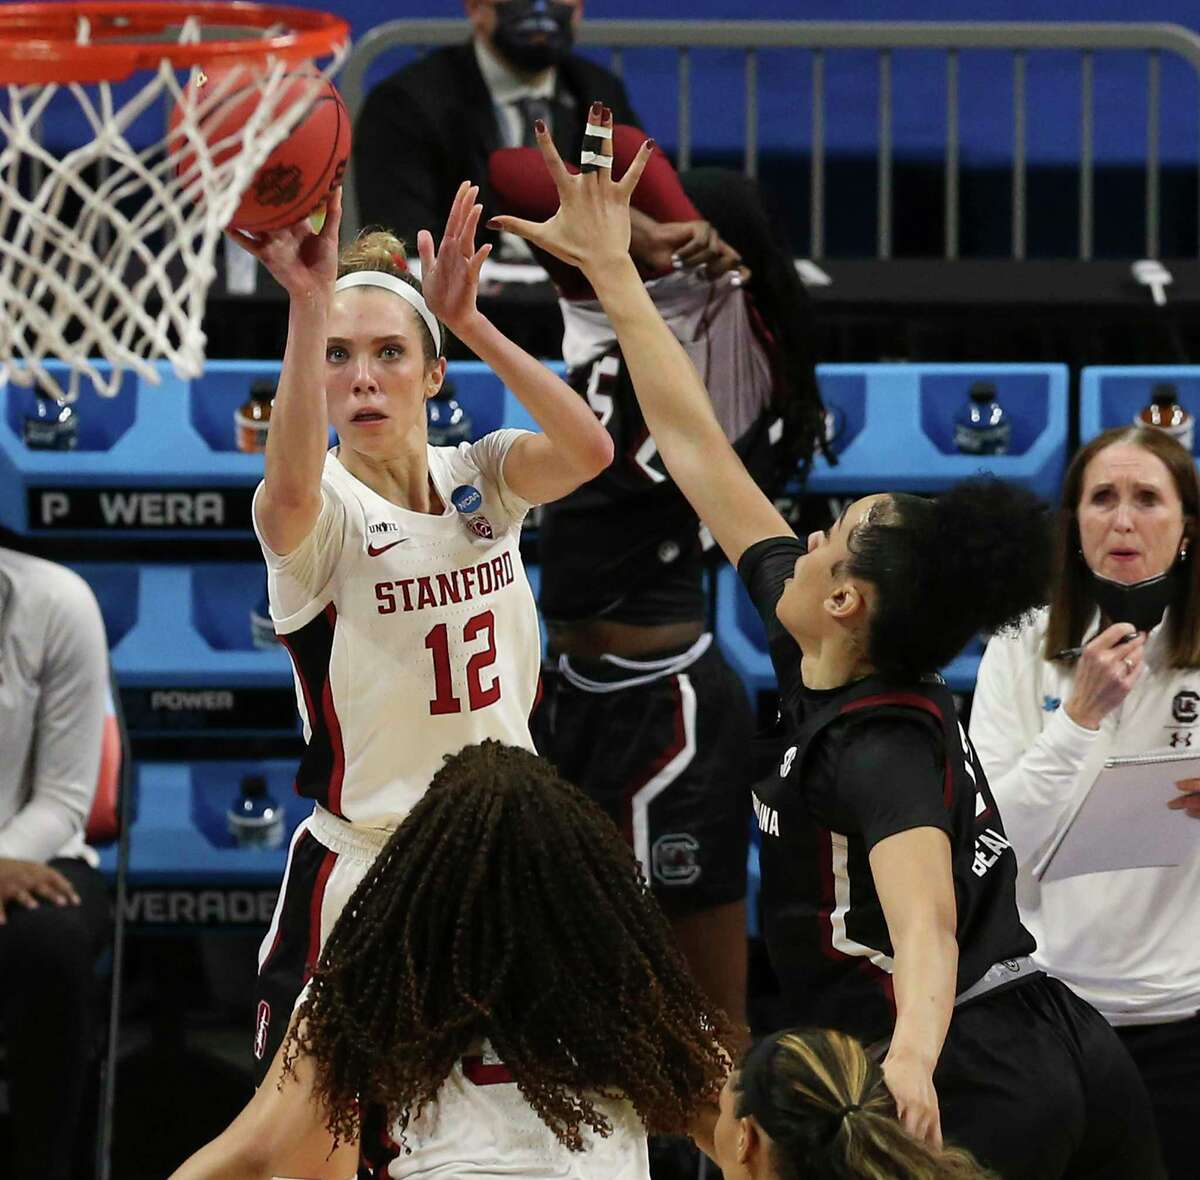 Stanford survives late push from South Carolina to advance to national